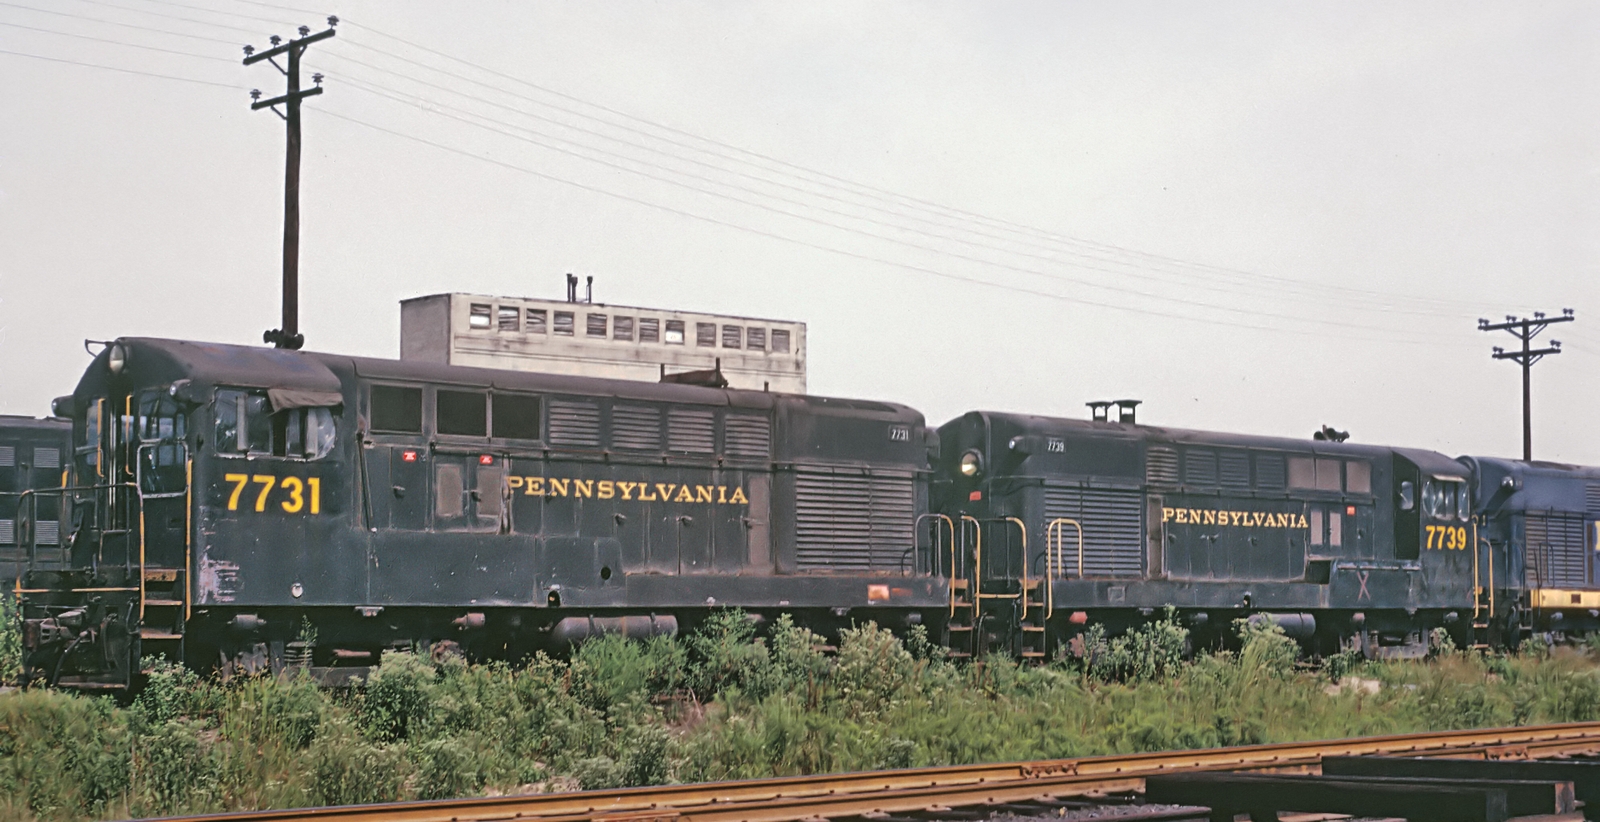 Two H-20-44s of the Pennsylvania Railroad in August 1970 at Baltimore, Maryland